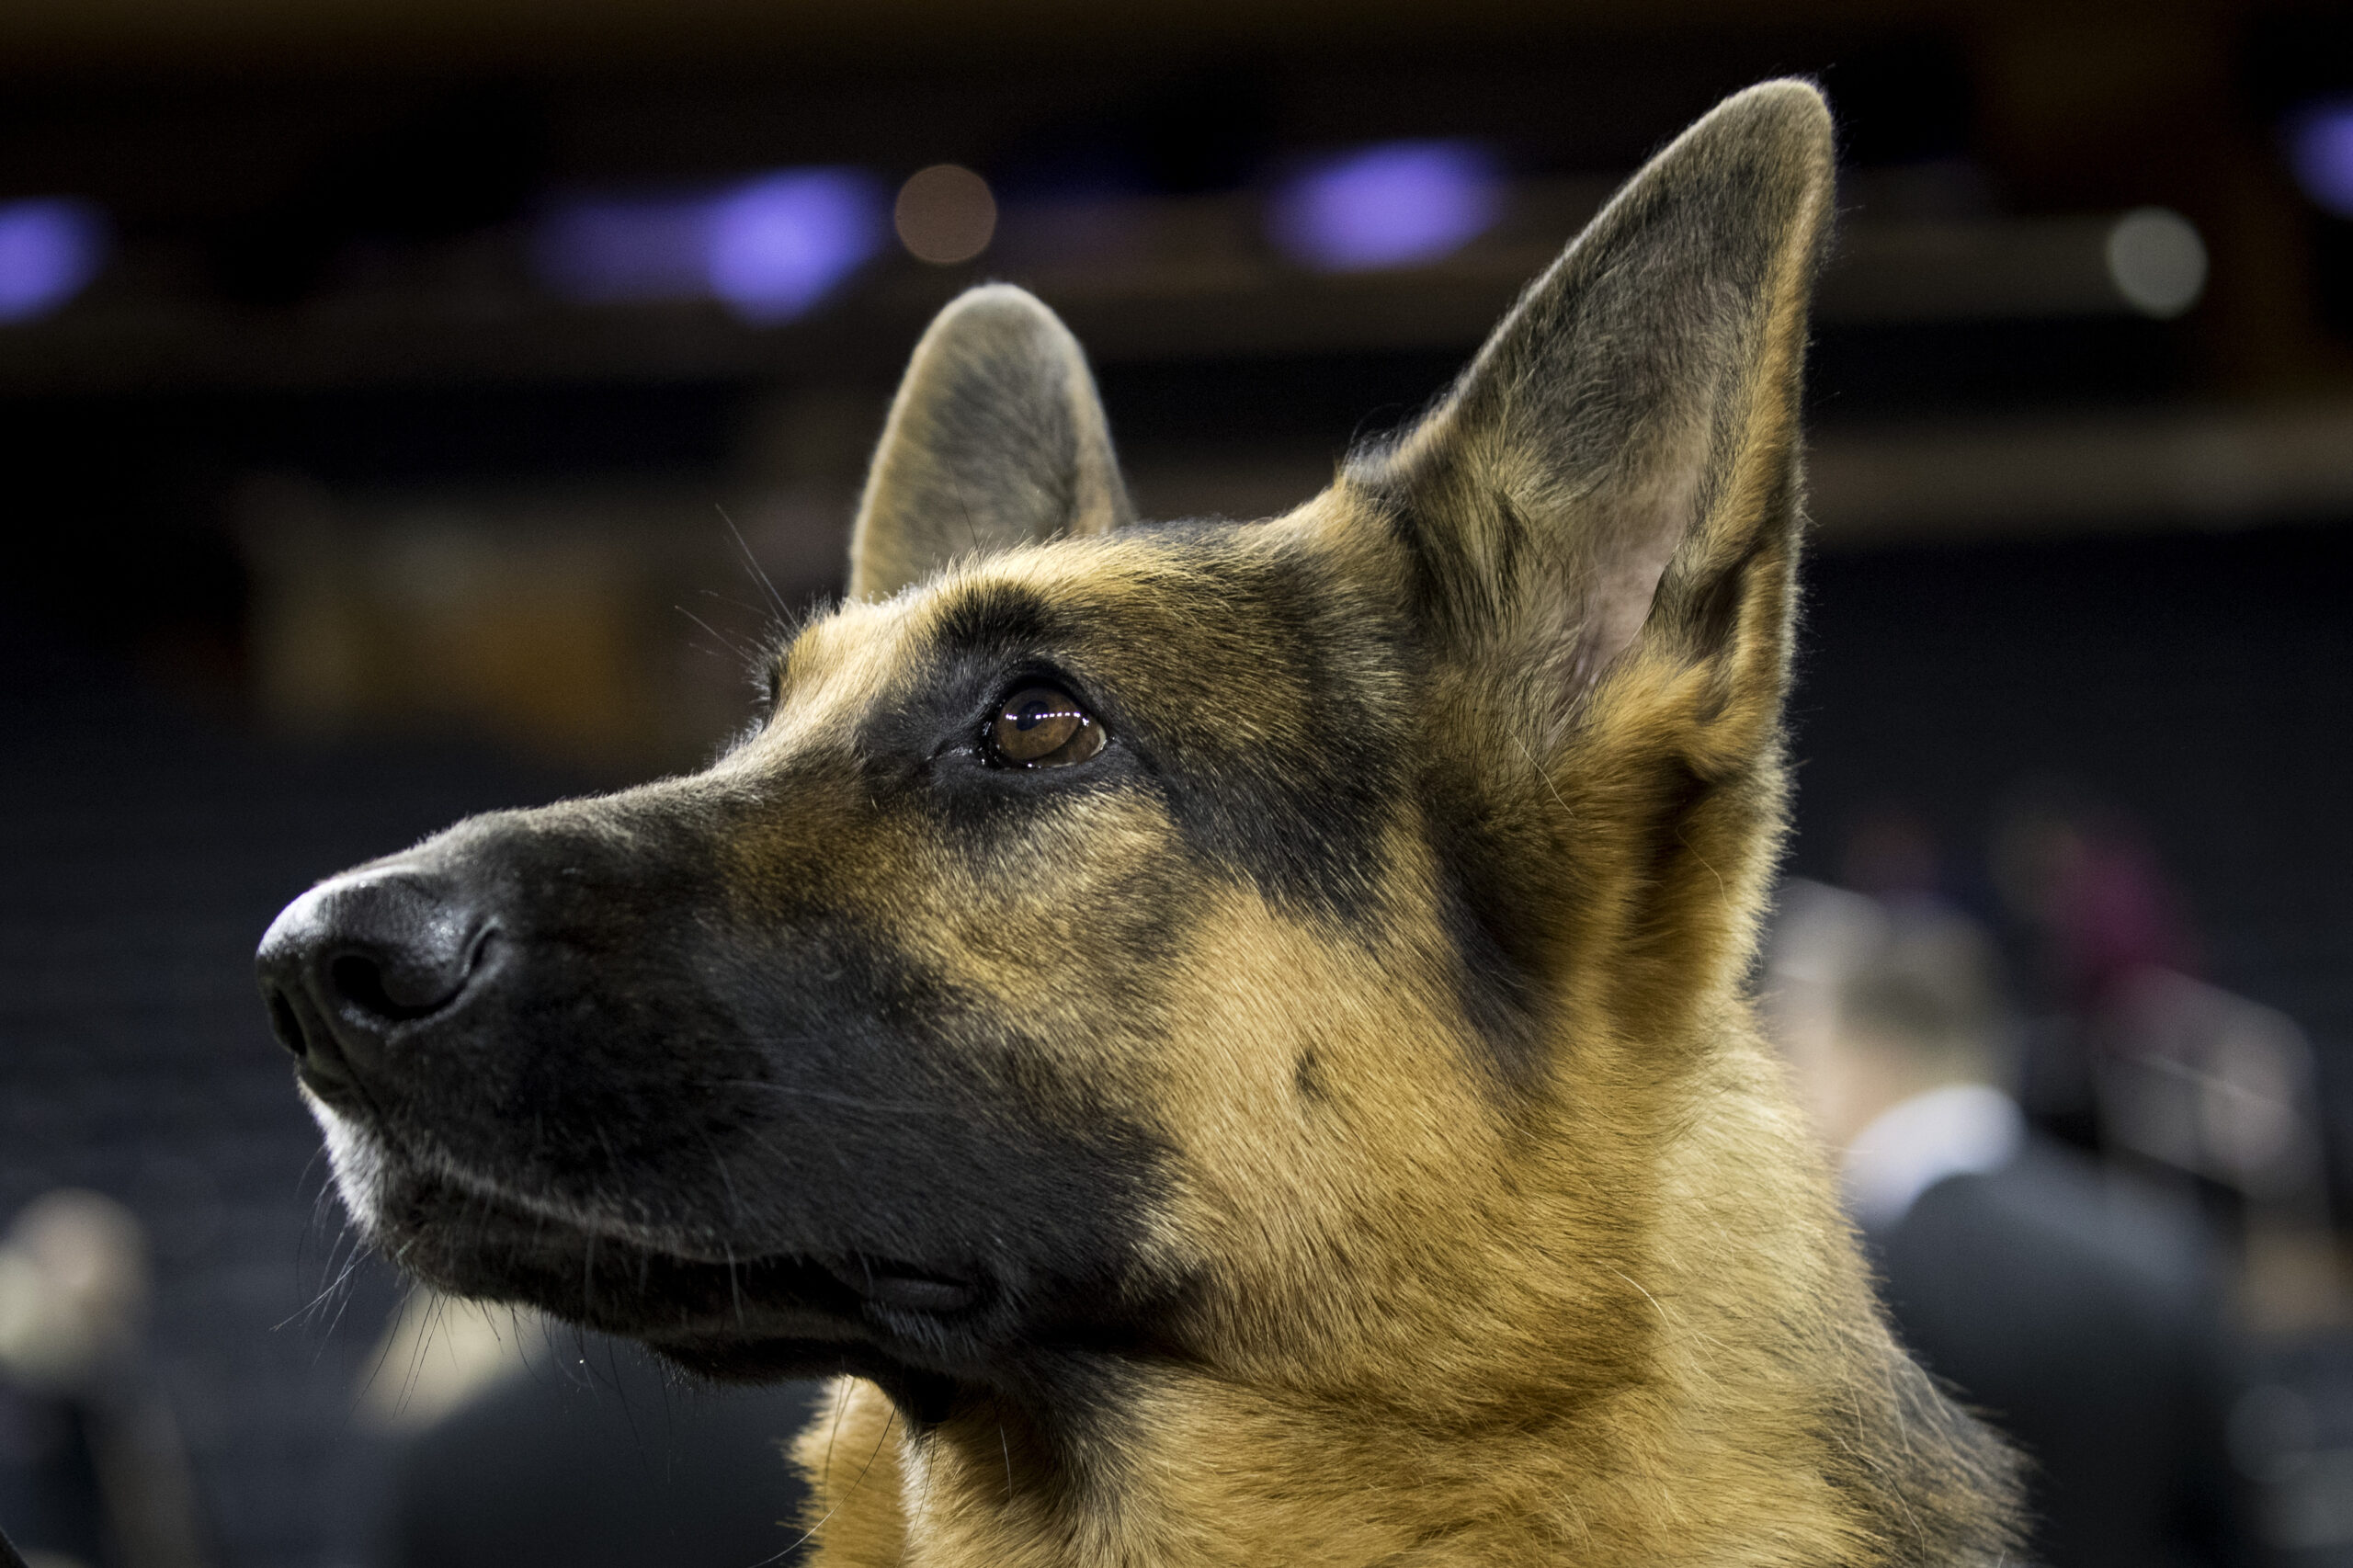 NEW YORK, NY - FEBRUARY 14: Rumor the German Shepherd poses for photos after winning Best In Show at the Westminster Kennel Club Dog Show at Madison Square Garden, February 14, 2017 in New York City. There are 2874 dogs entered in this show with a total entry of 2908 in 200 different breeds or varieties, including 23 obedience entries.